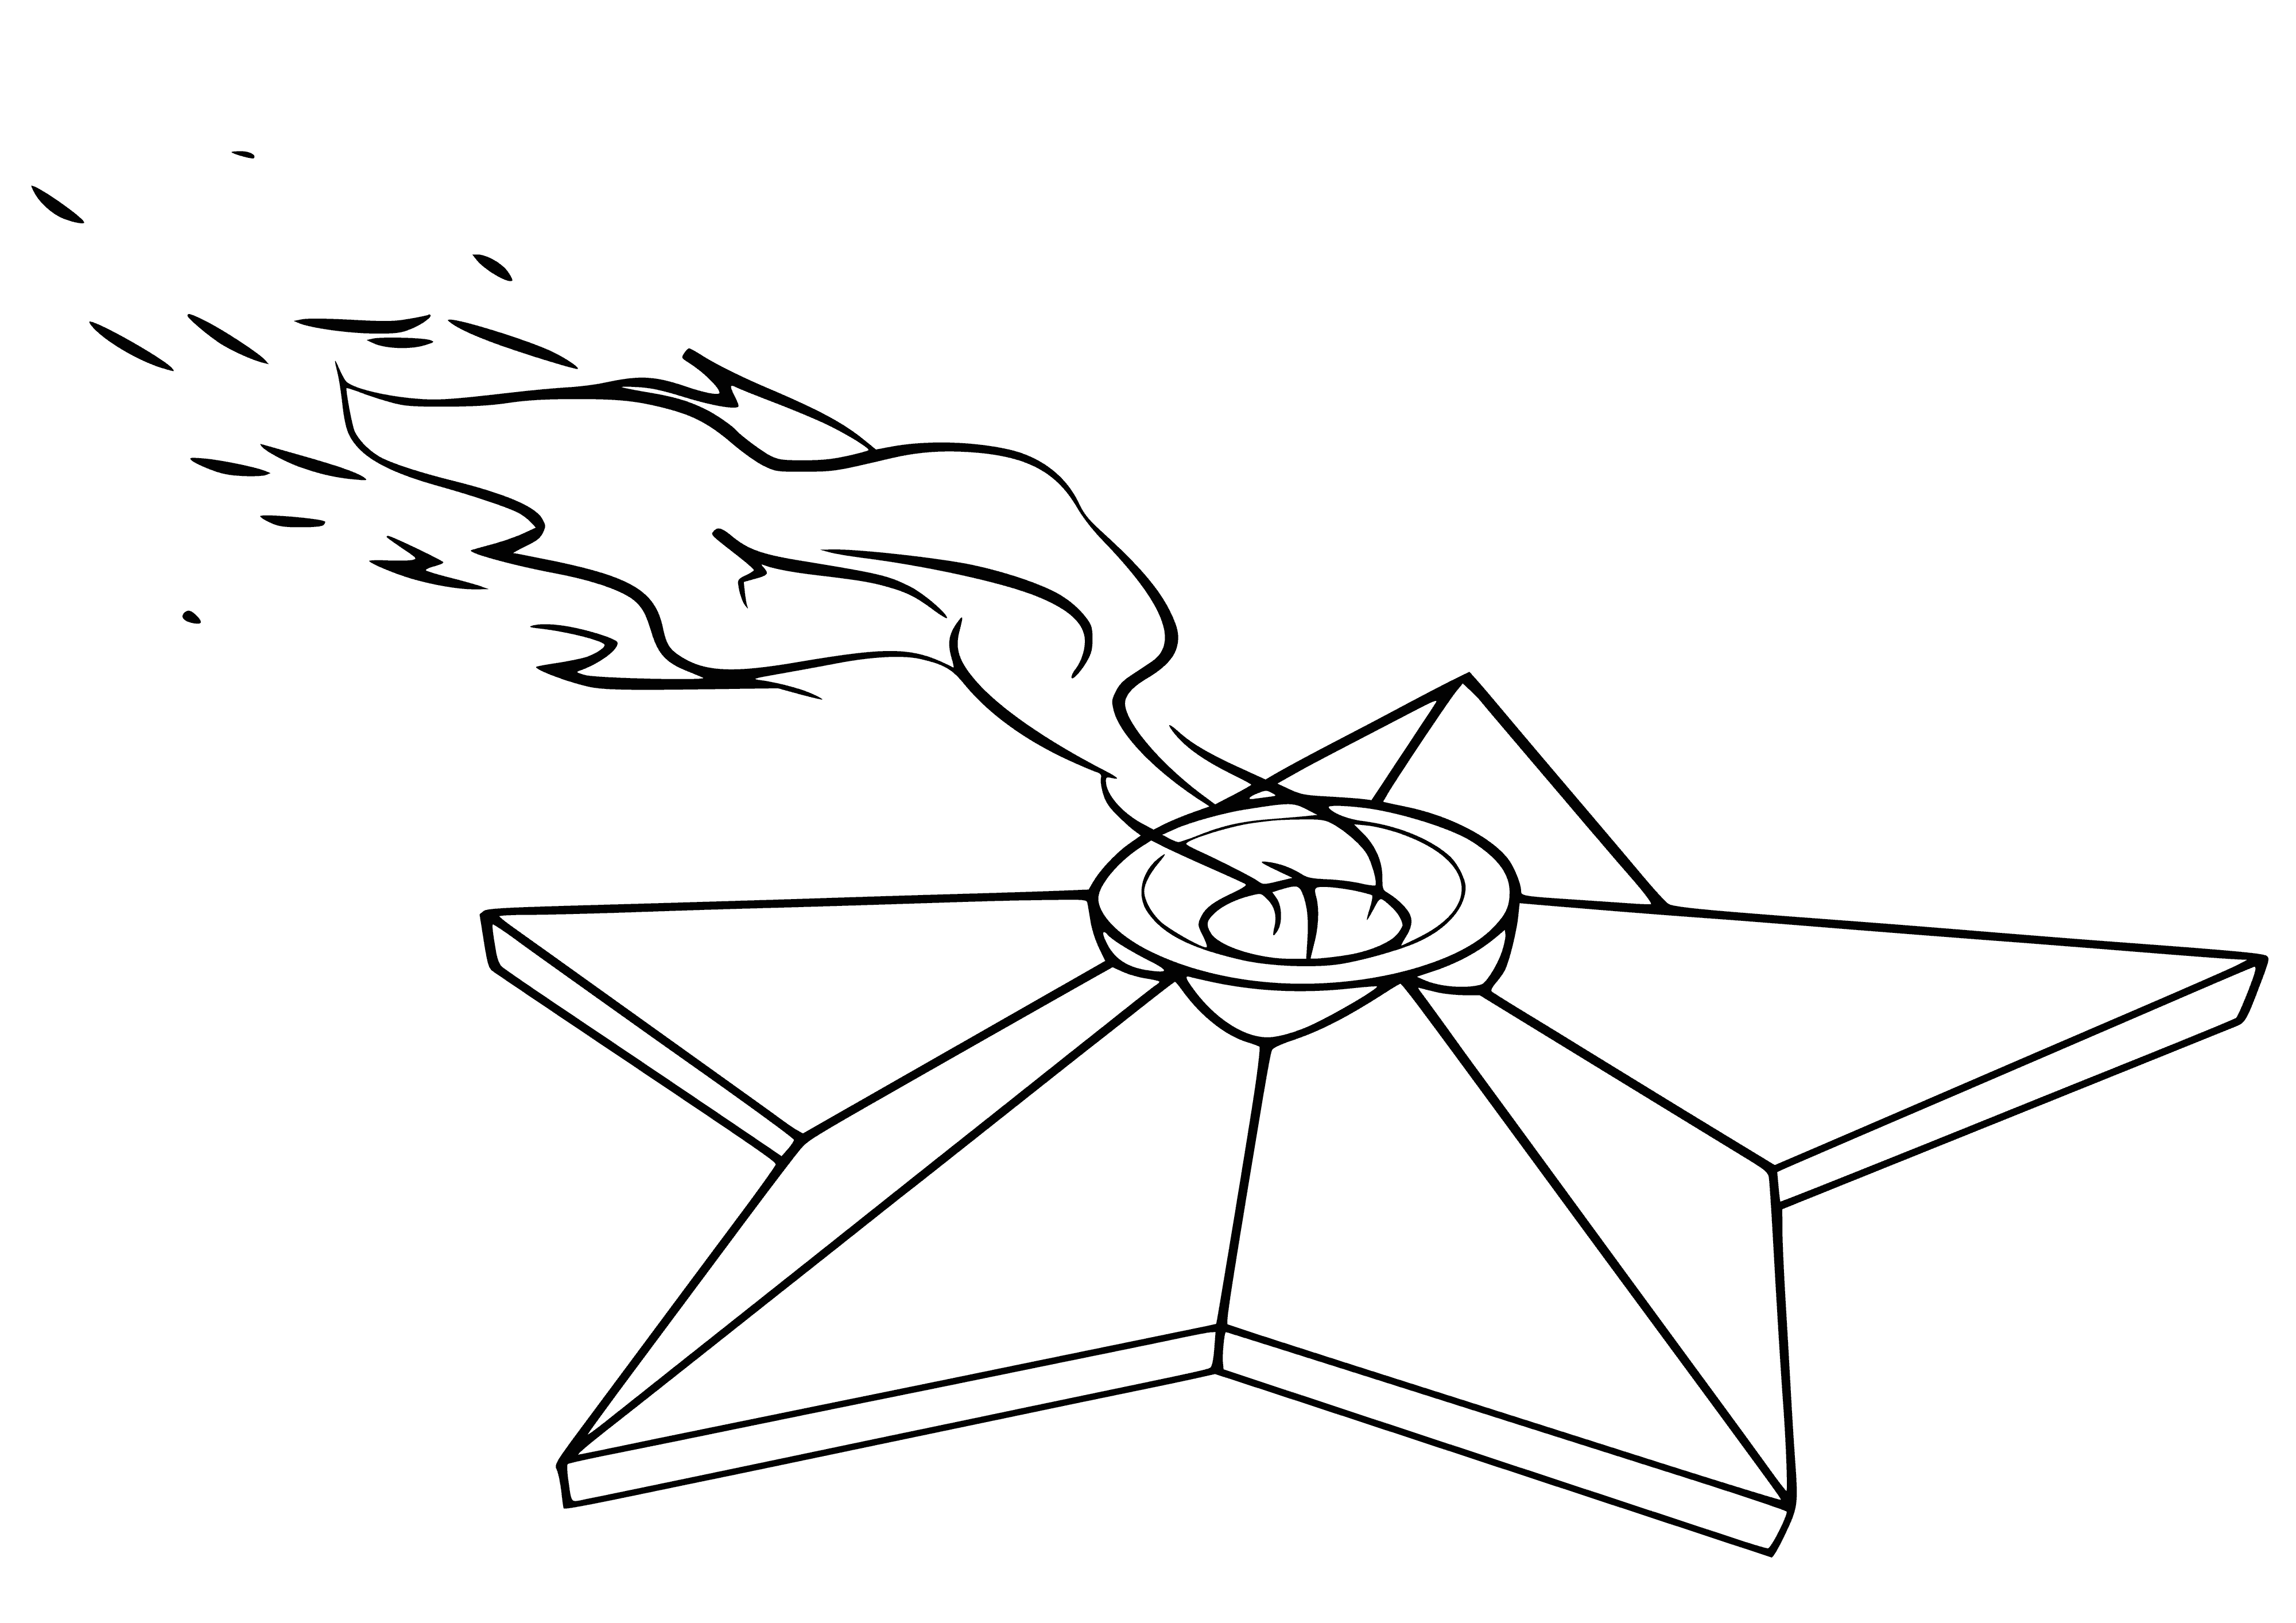 Eternal flame coloring page